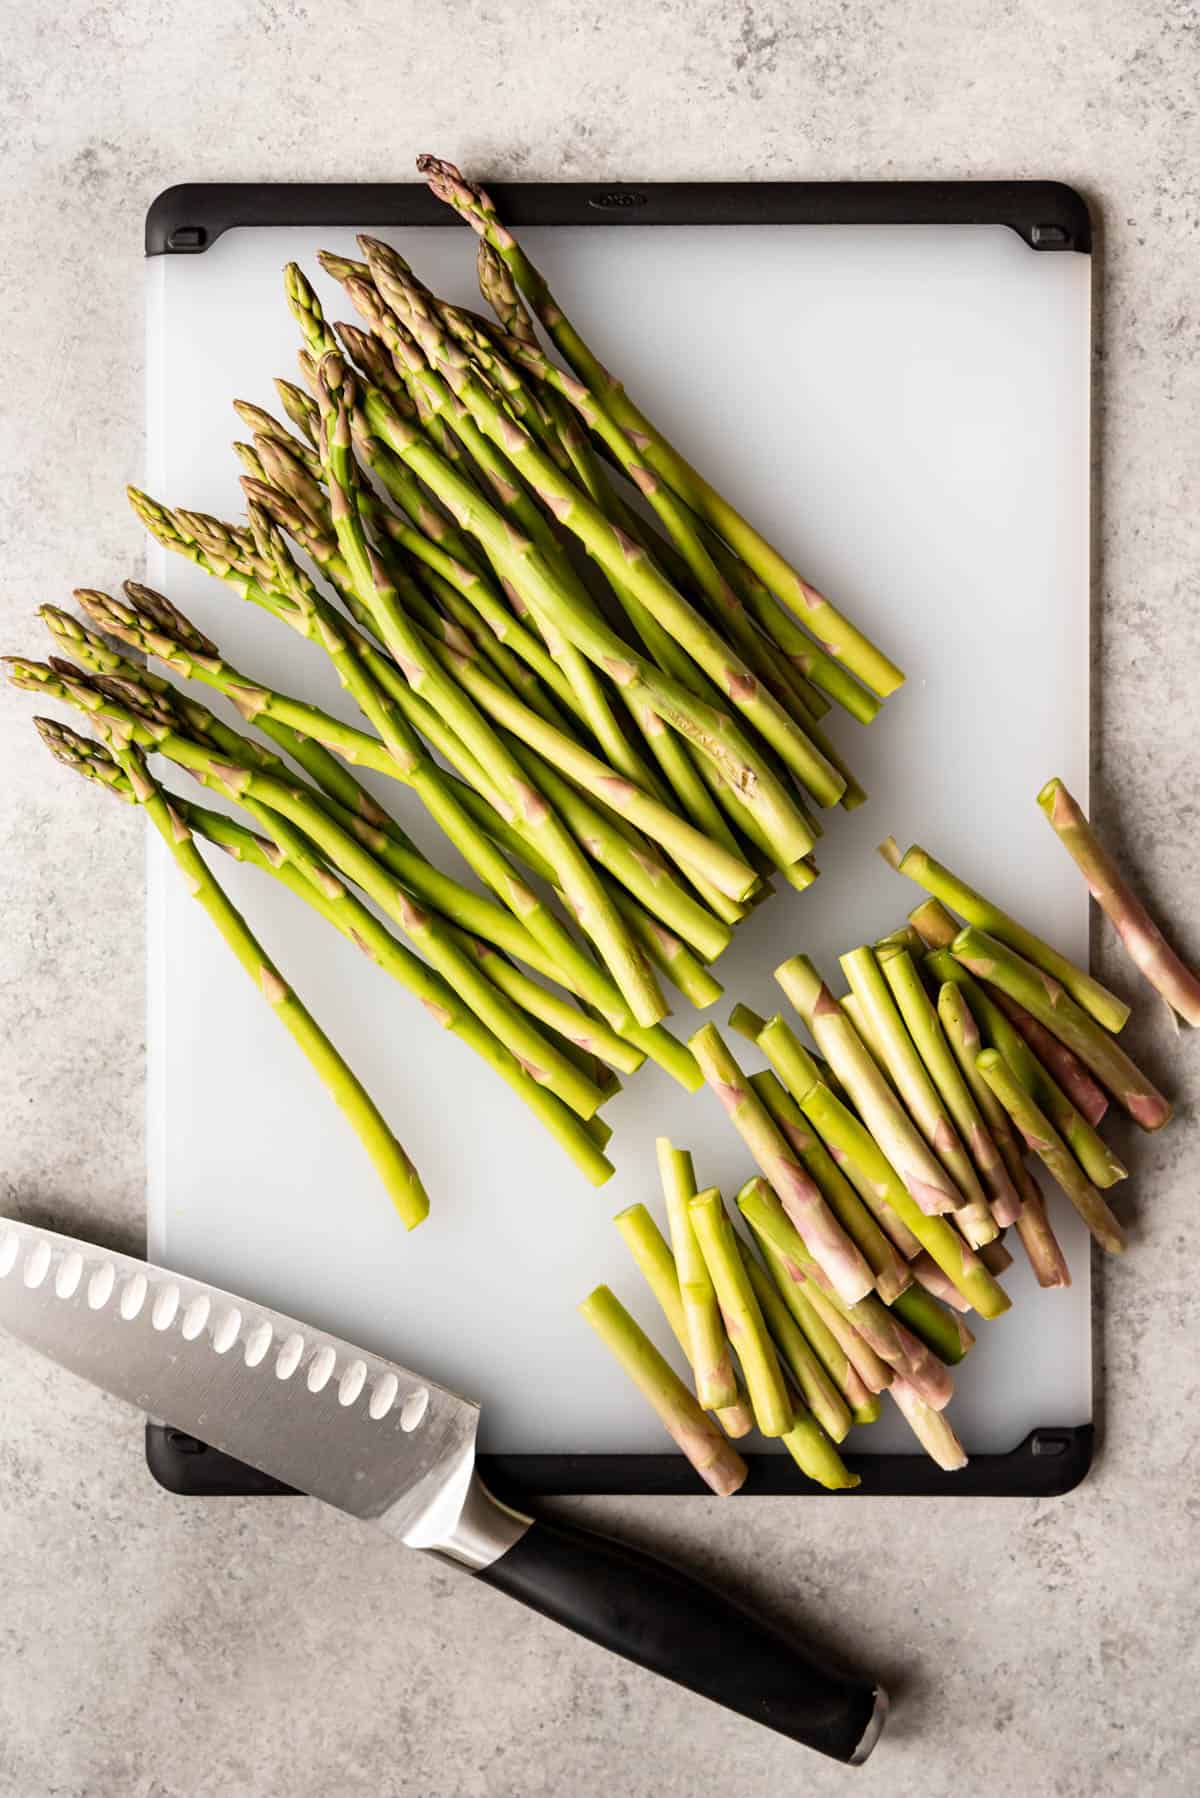 An image of a bunch of asparagus trimmed of it's tough ends on a cutting board with a chopping knife.